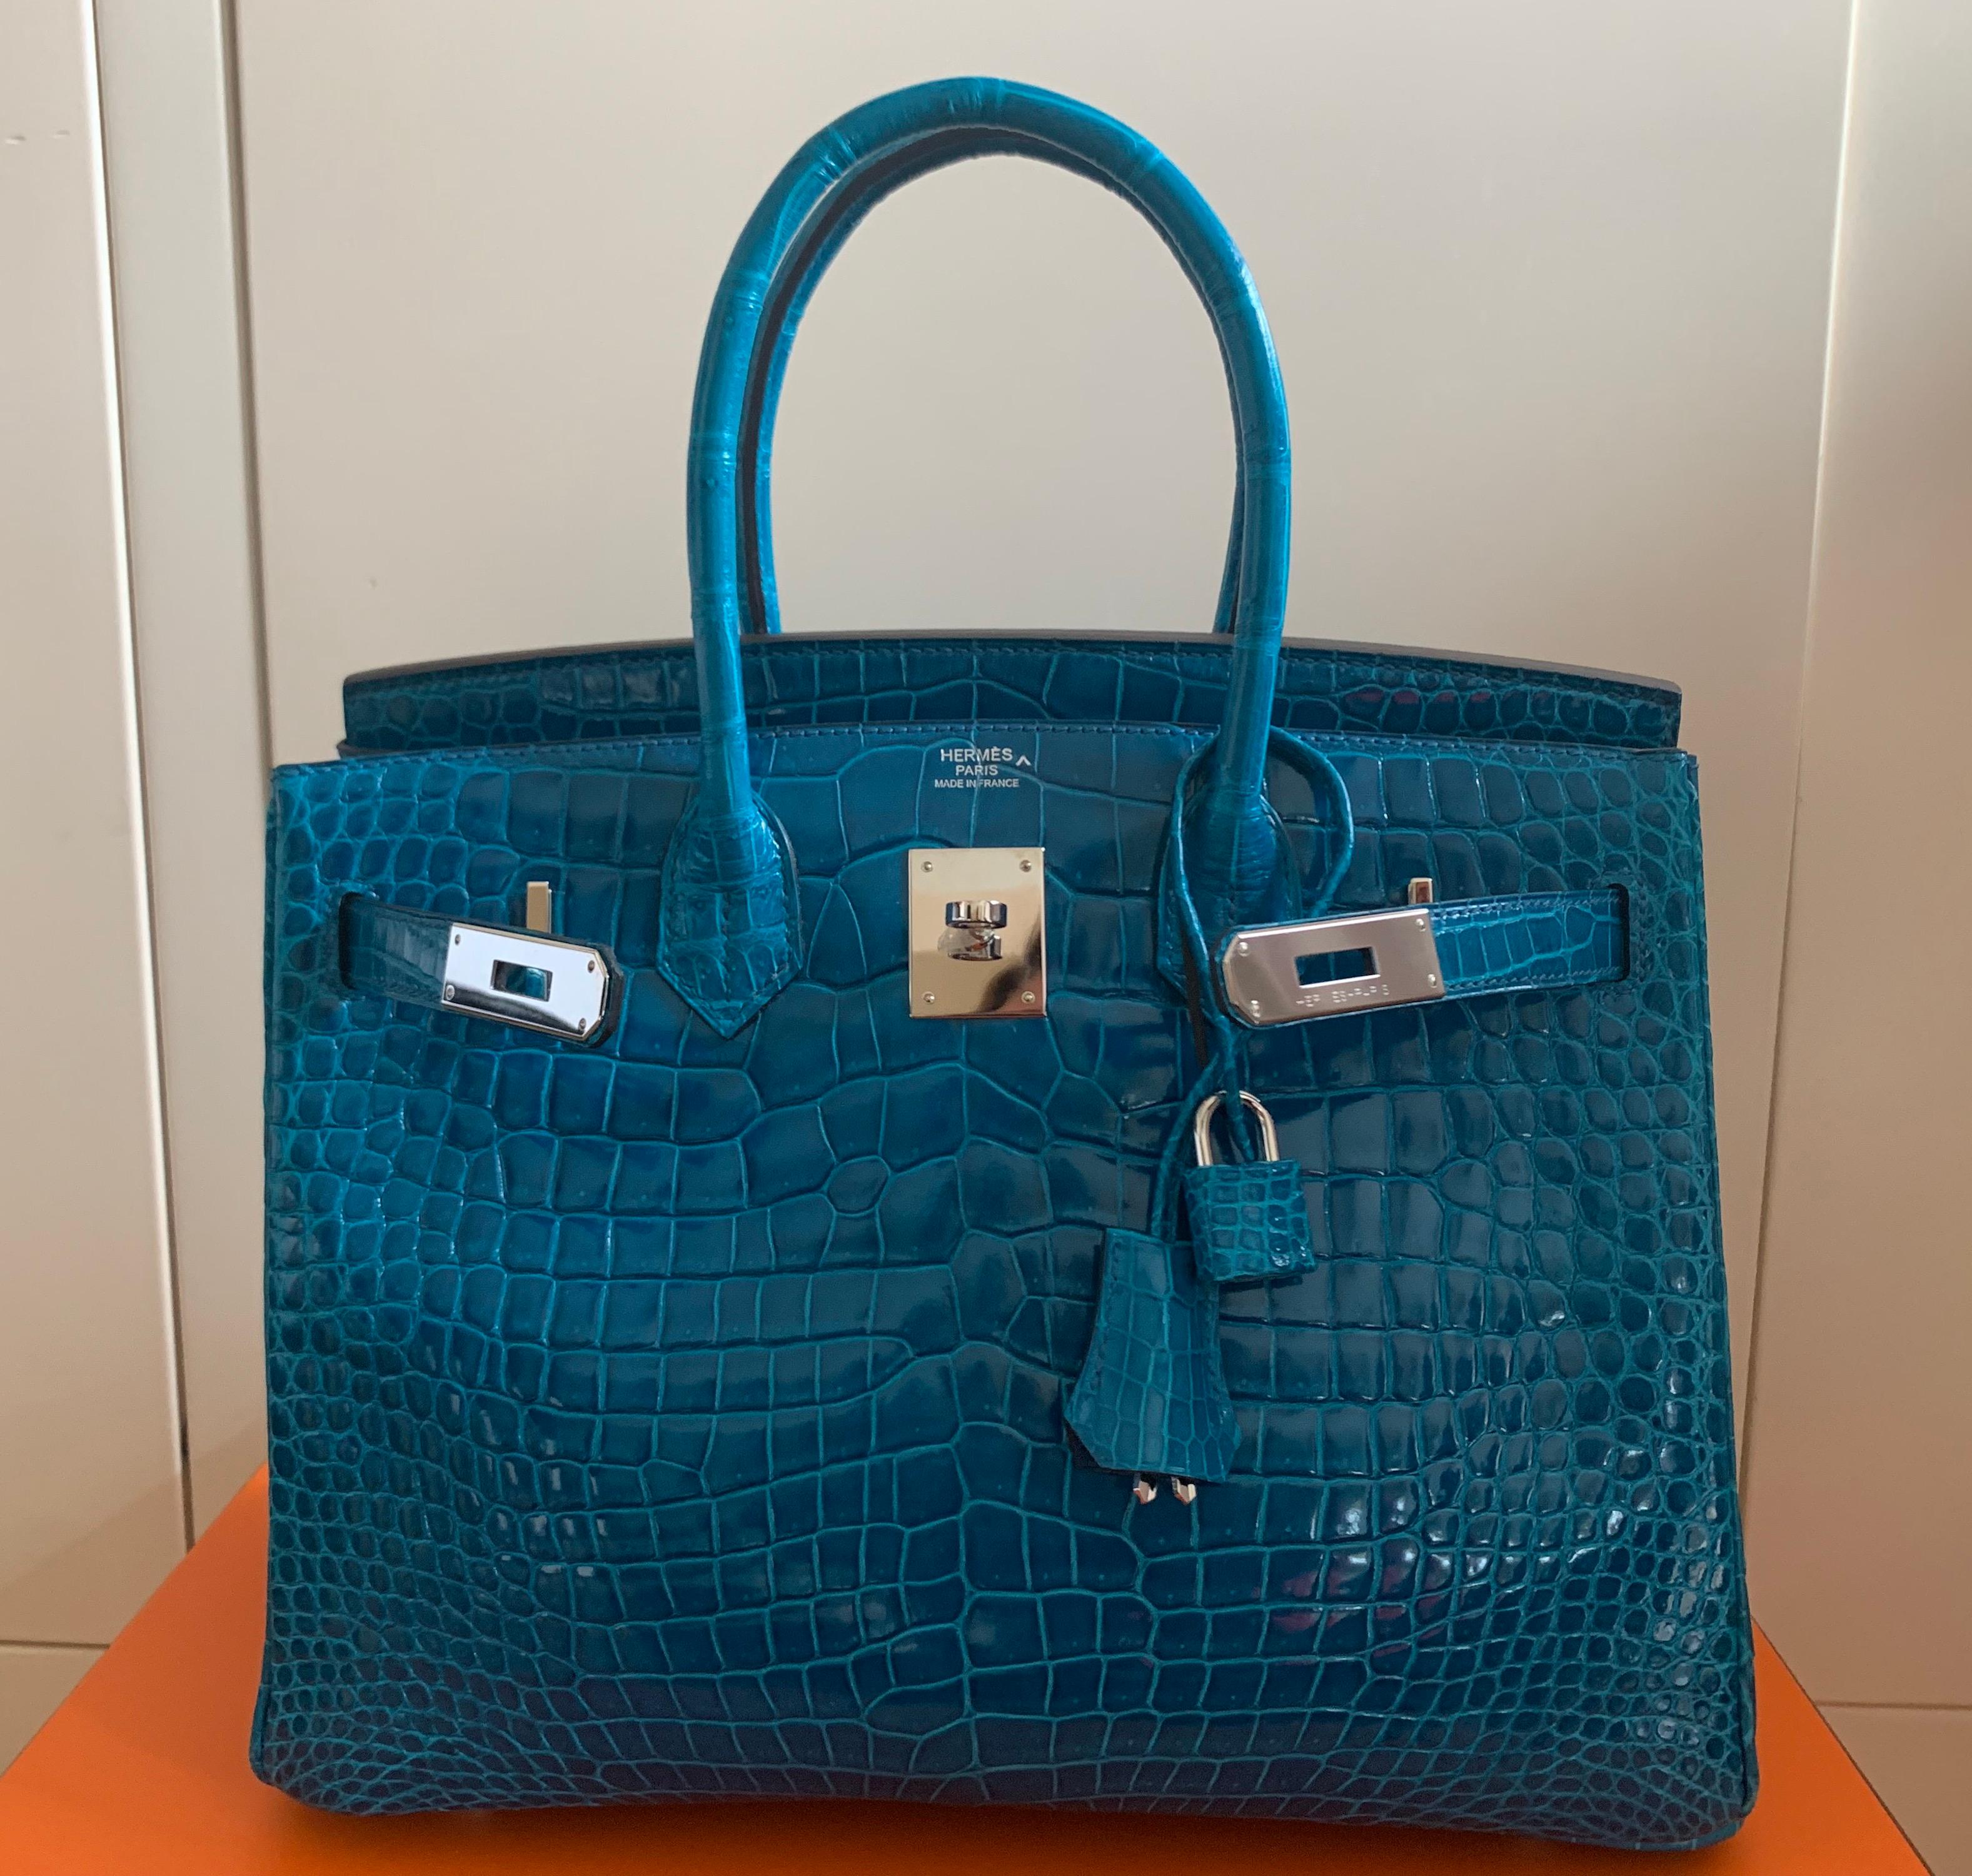 Birkin 30 blue Izmir croco shiny Porosus. Highly collectible.
Very rare colour, blue like Caribbean deep sea
Two rolled top handles
Palladium plated Hardware
Internal zip and slip pocket   2014 letter R  in square 
Condition  Mint 
pre owned but